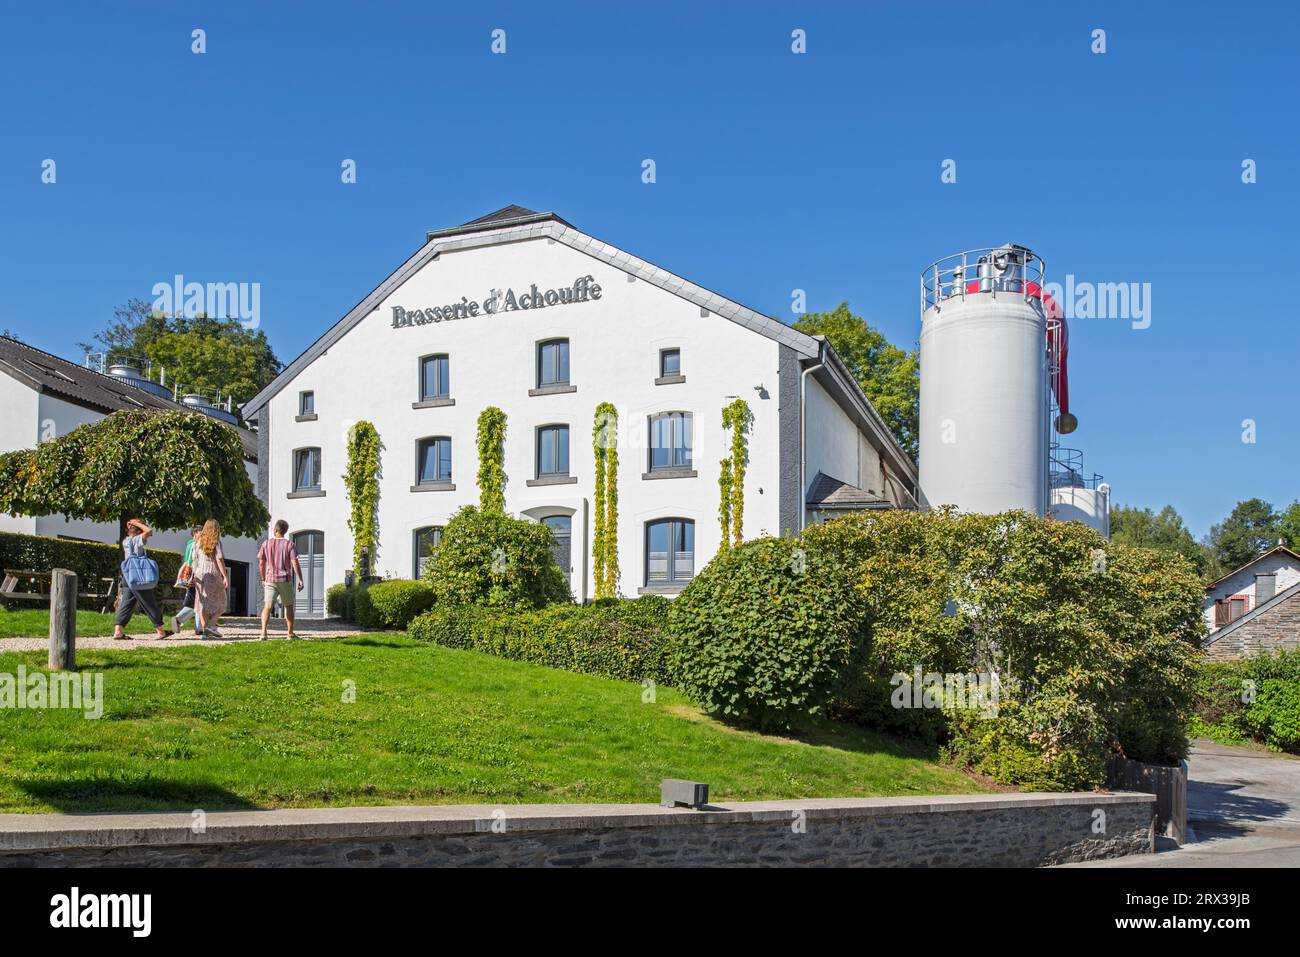 Brasserie d'Achouffe, Belgian brewery known for the La Chouffe beer, based in Achouffe, Houffalize, province of Luxembourg, Wallonia, Belgium Stock Photo